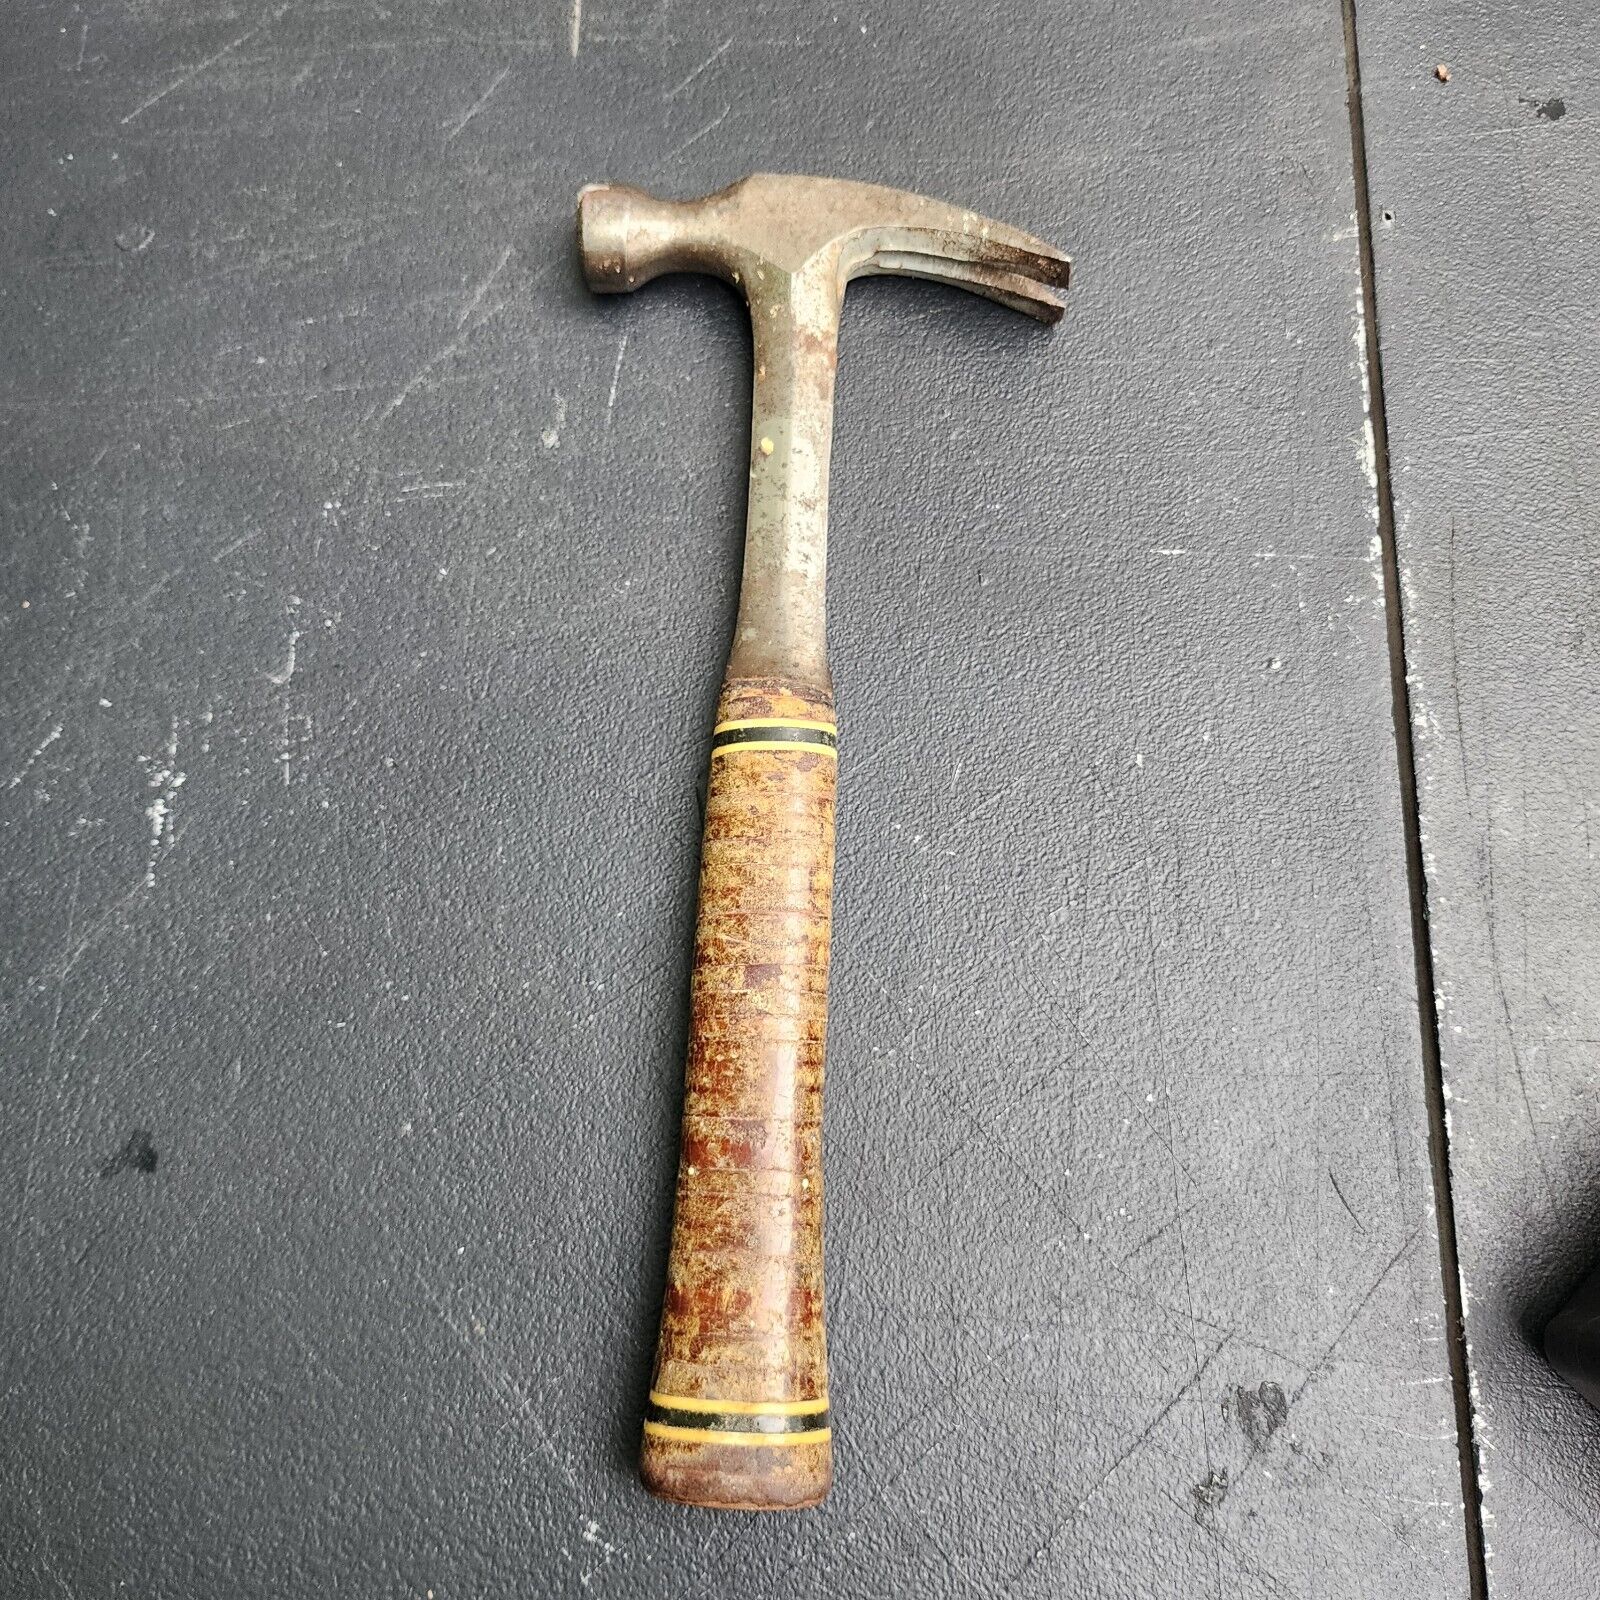 Eastwing Rock Hammer 16 Oz Head Vintage Made In USA 